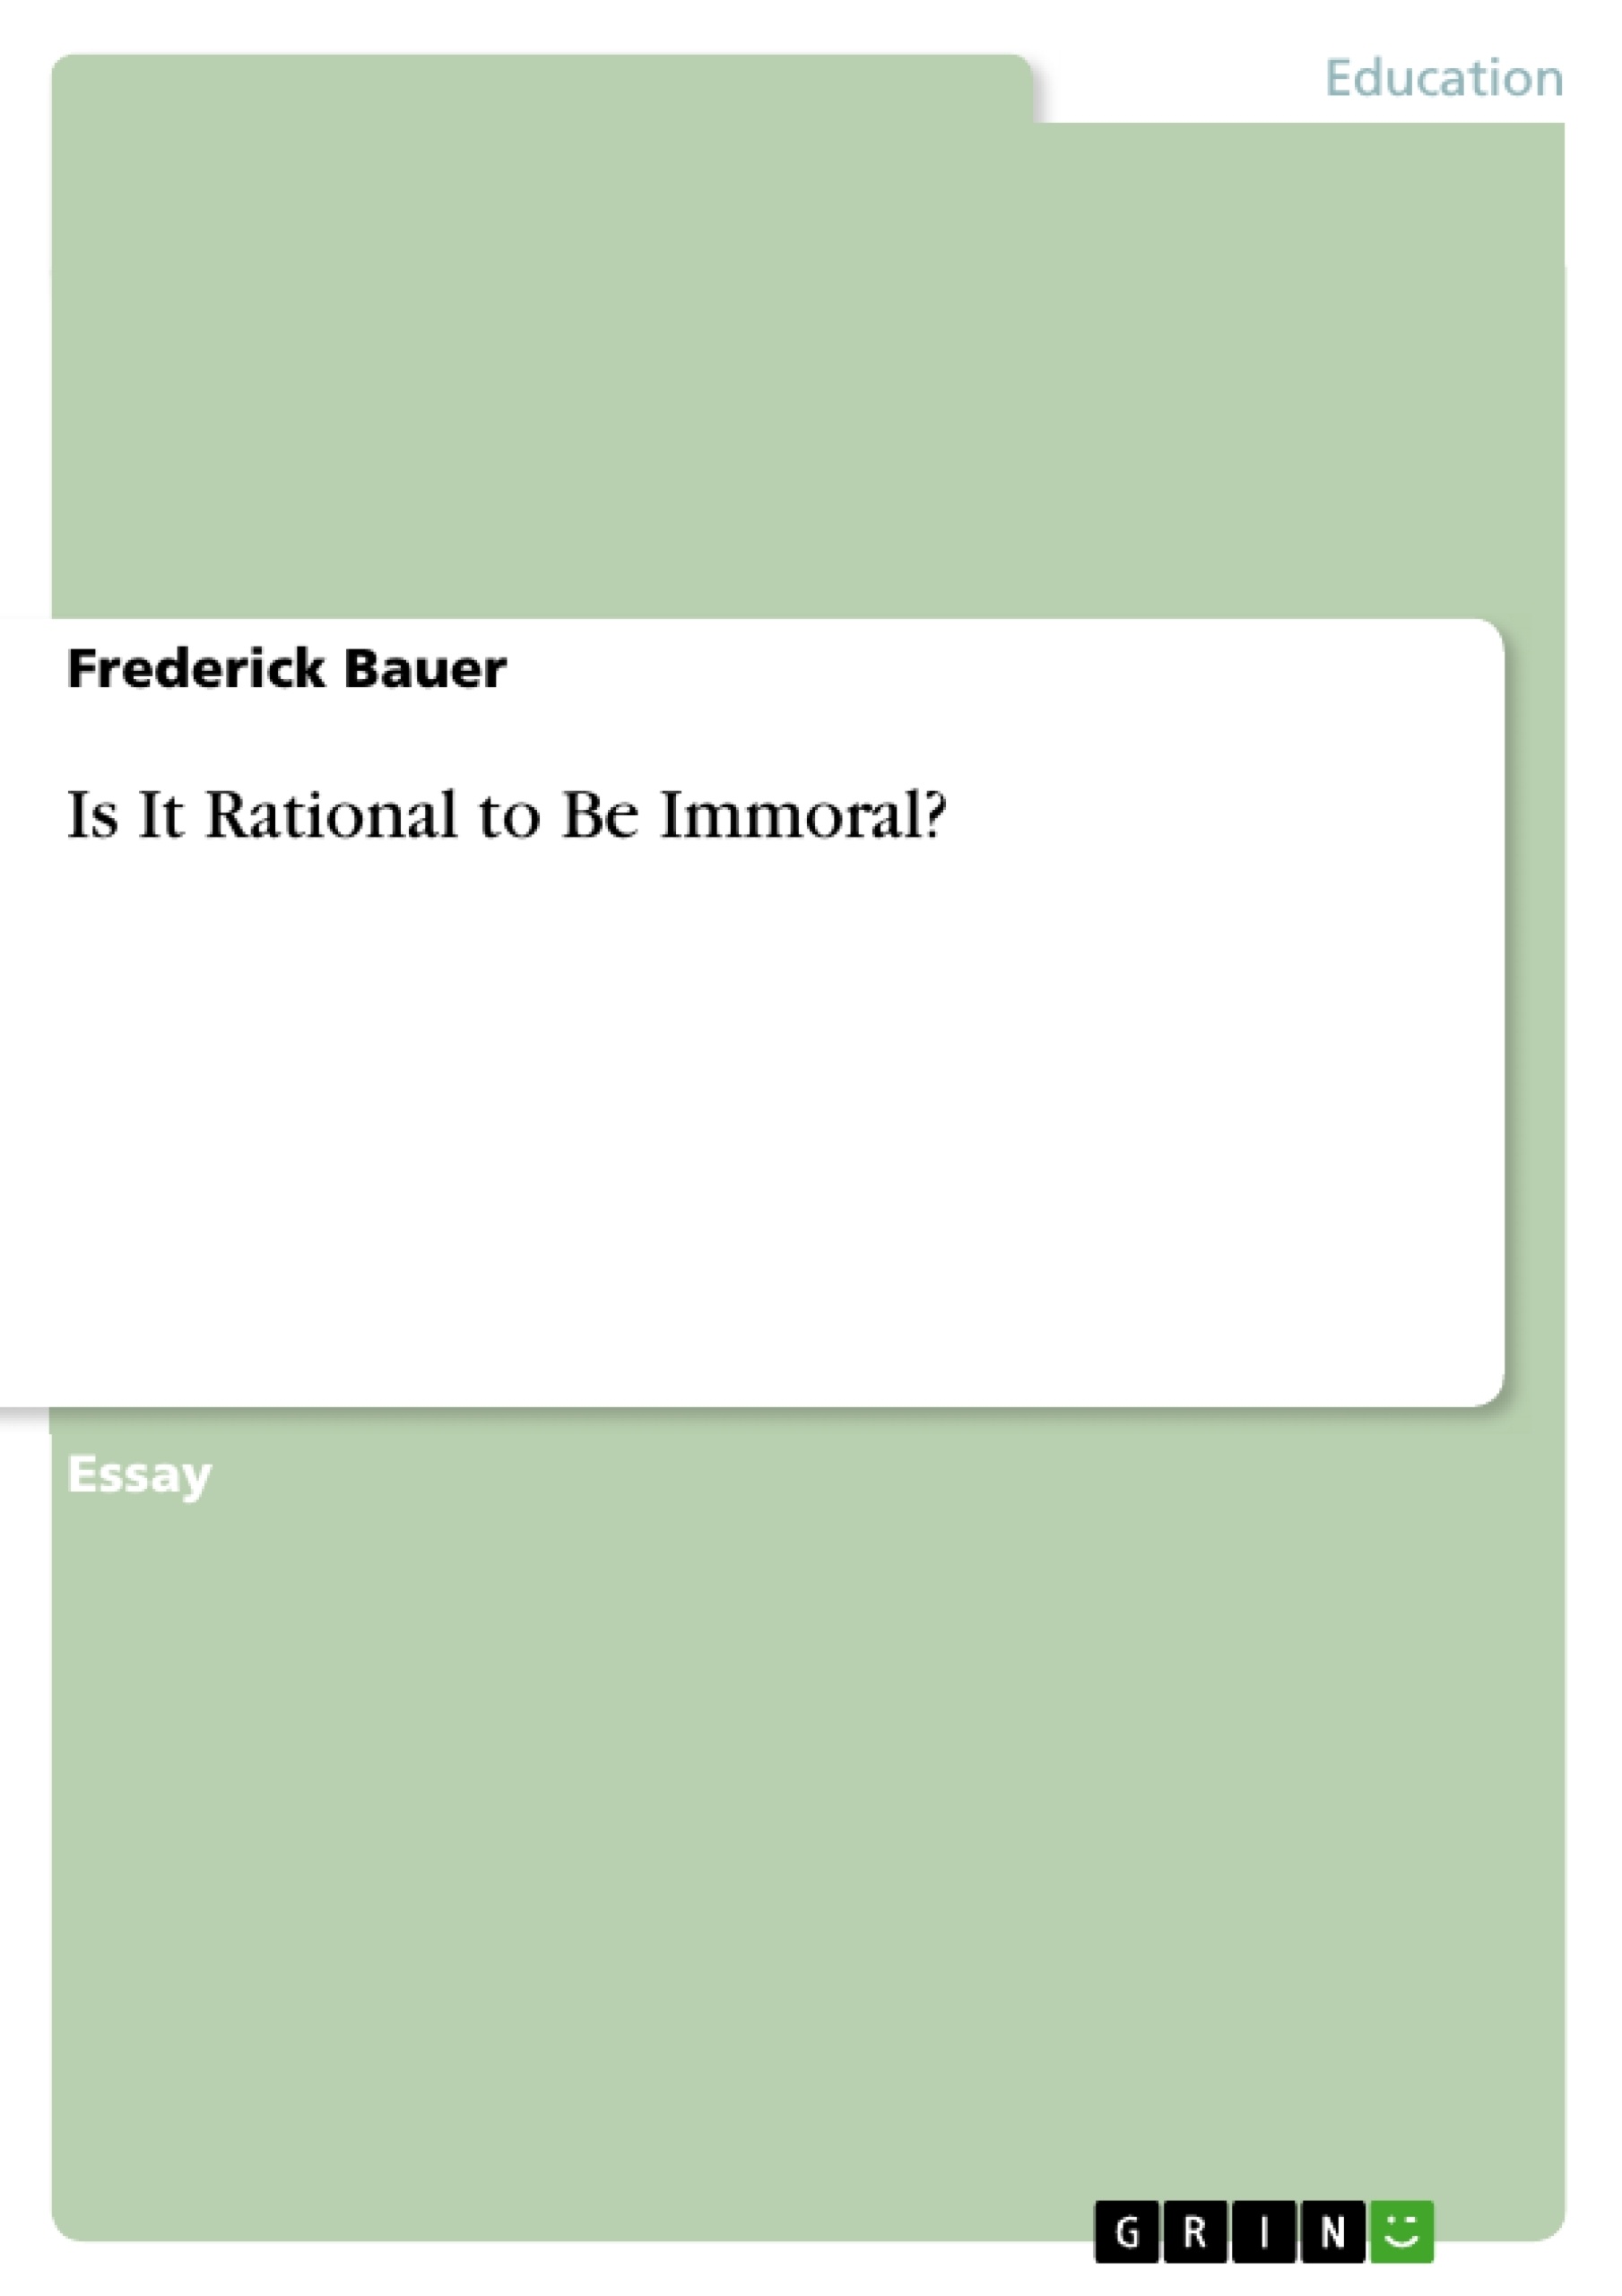 Title: Is It Rational to Be Immoral?